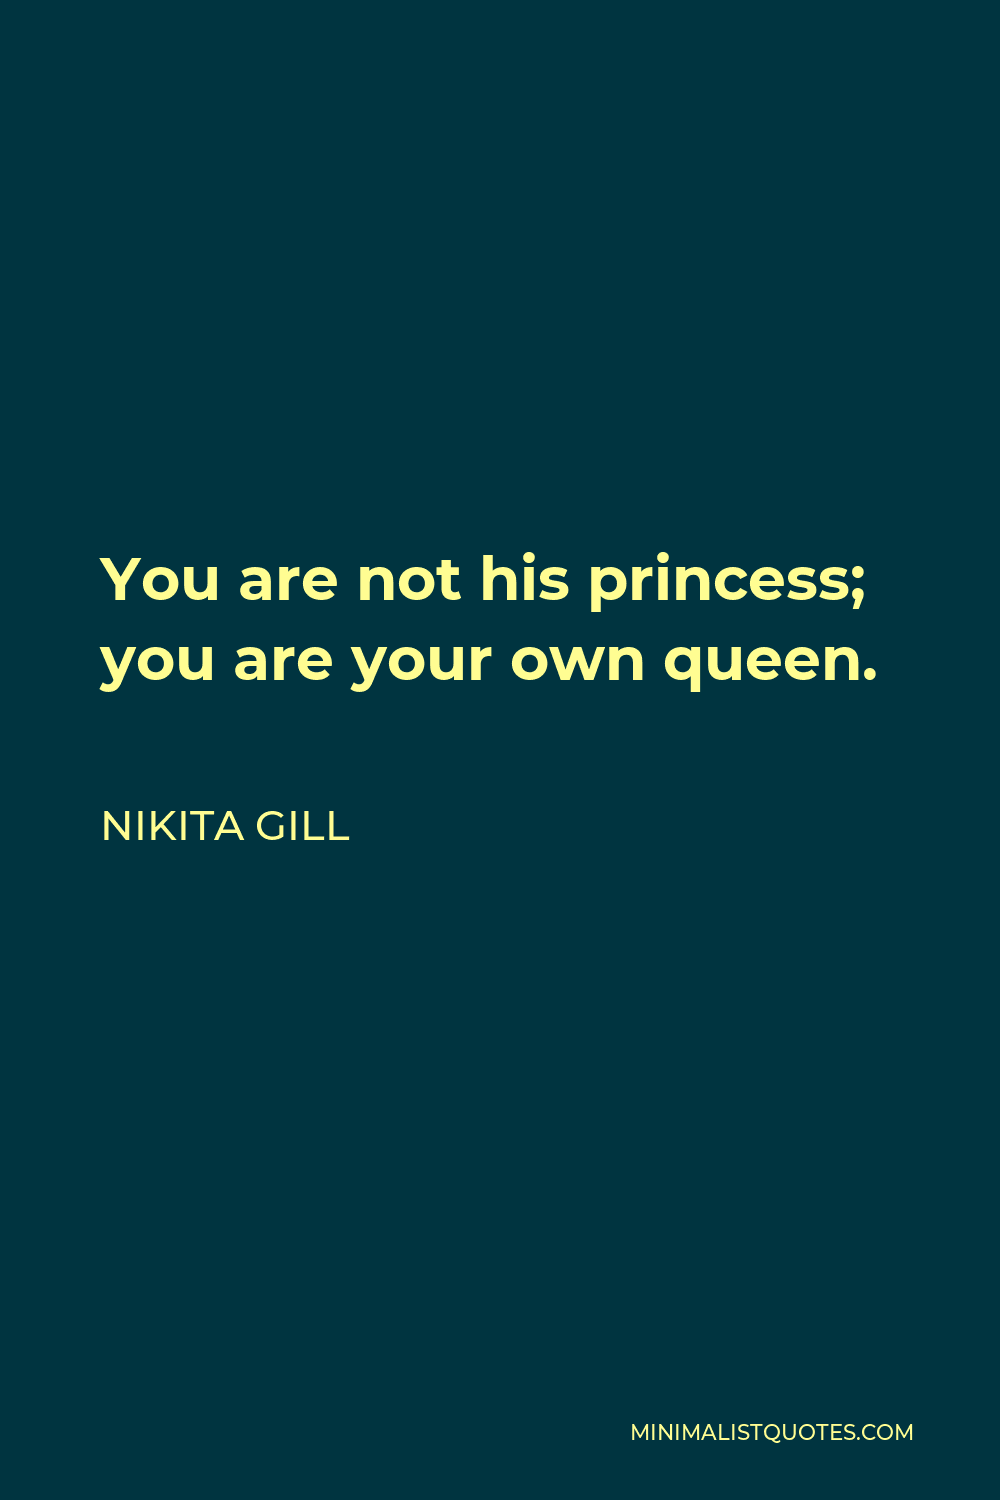 Nikita Gill Quote - You are not his princess. You are your own queen.